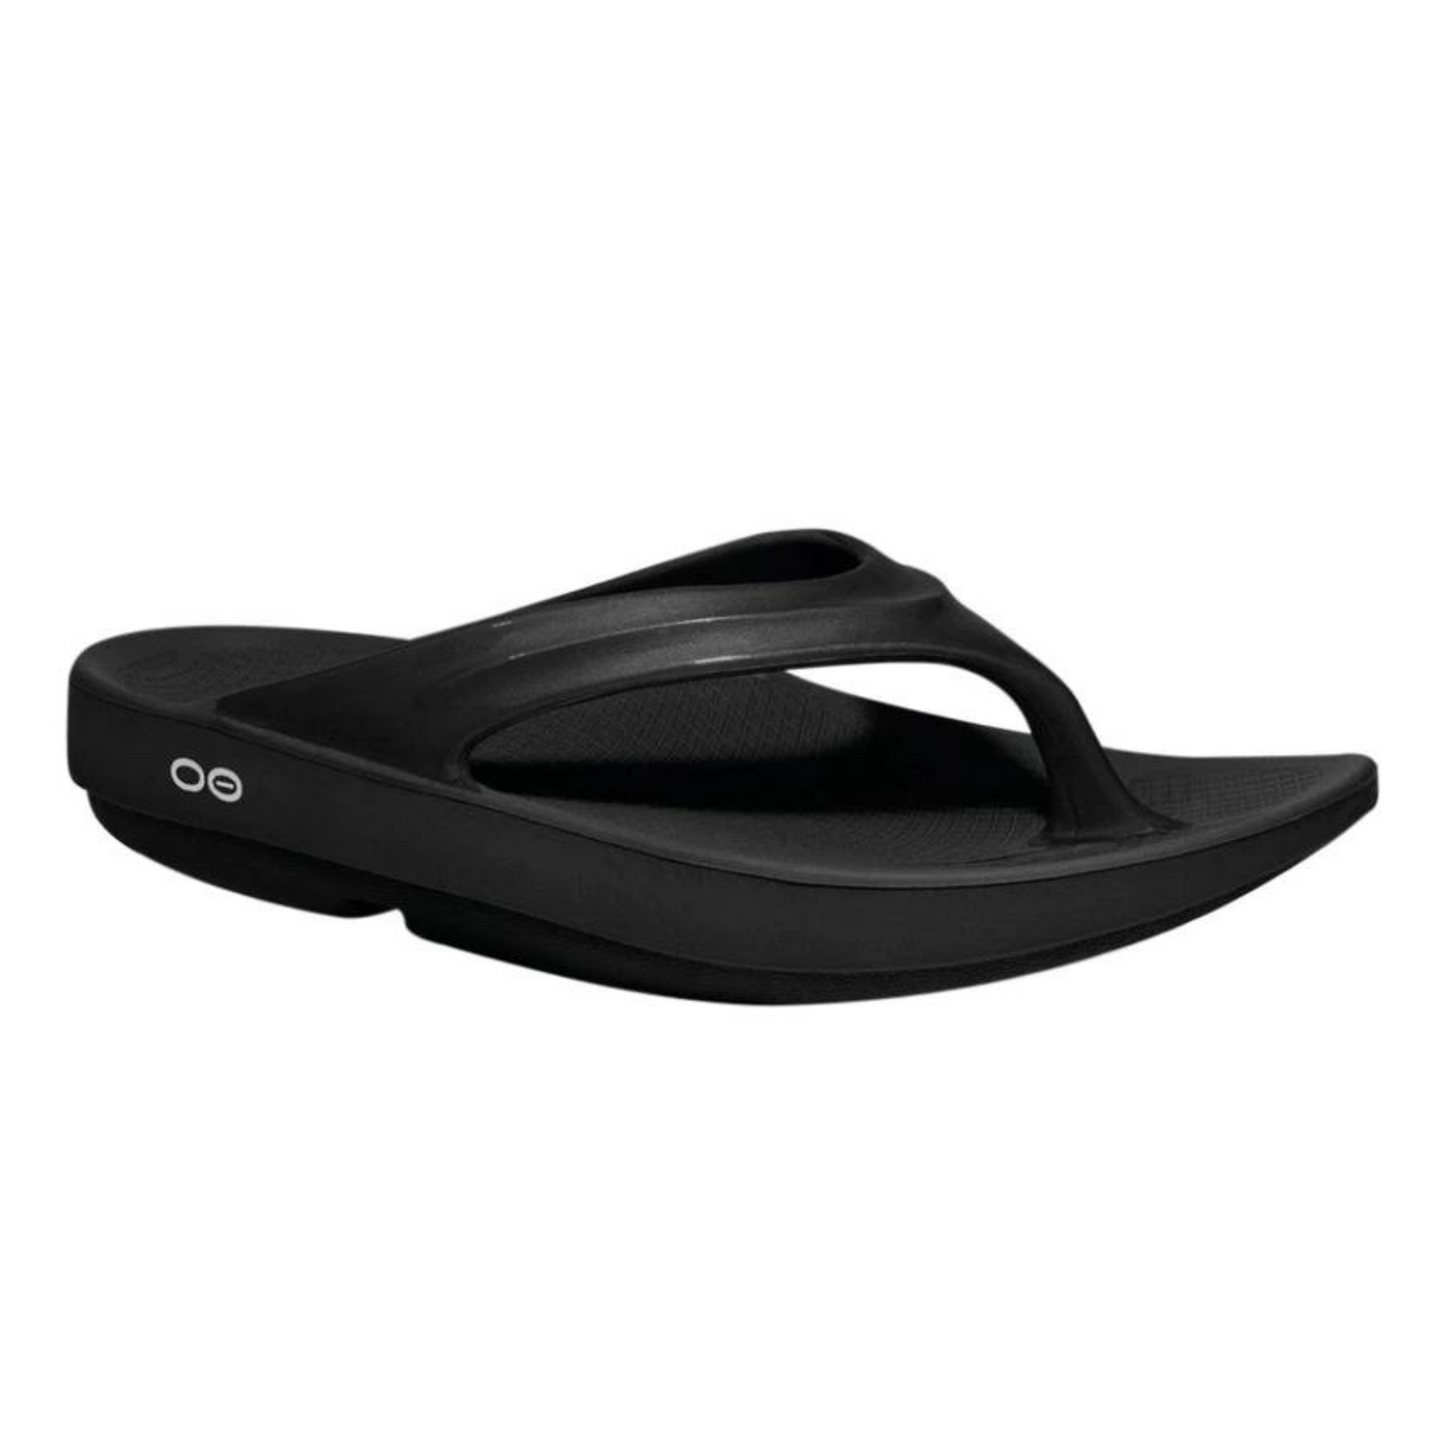 A right angle view of a black foam sandal with a single between-toe strap and grippy sole.